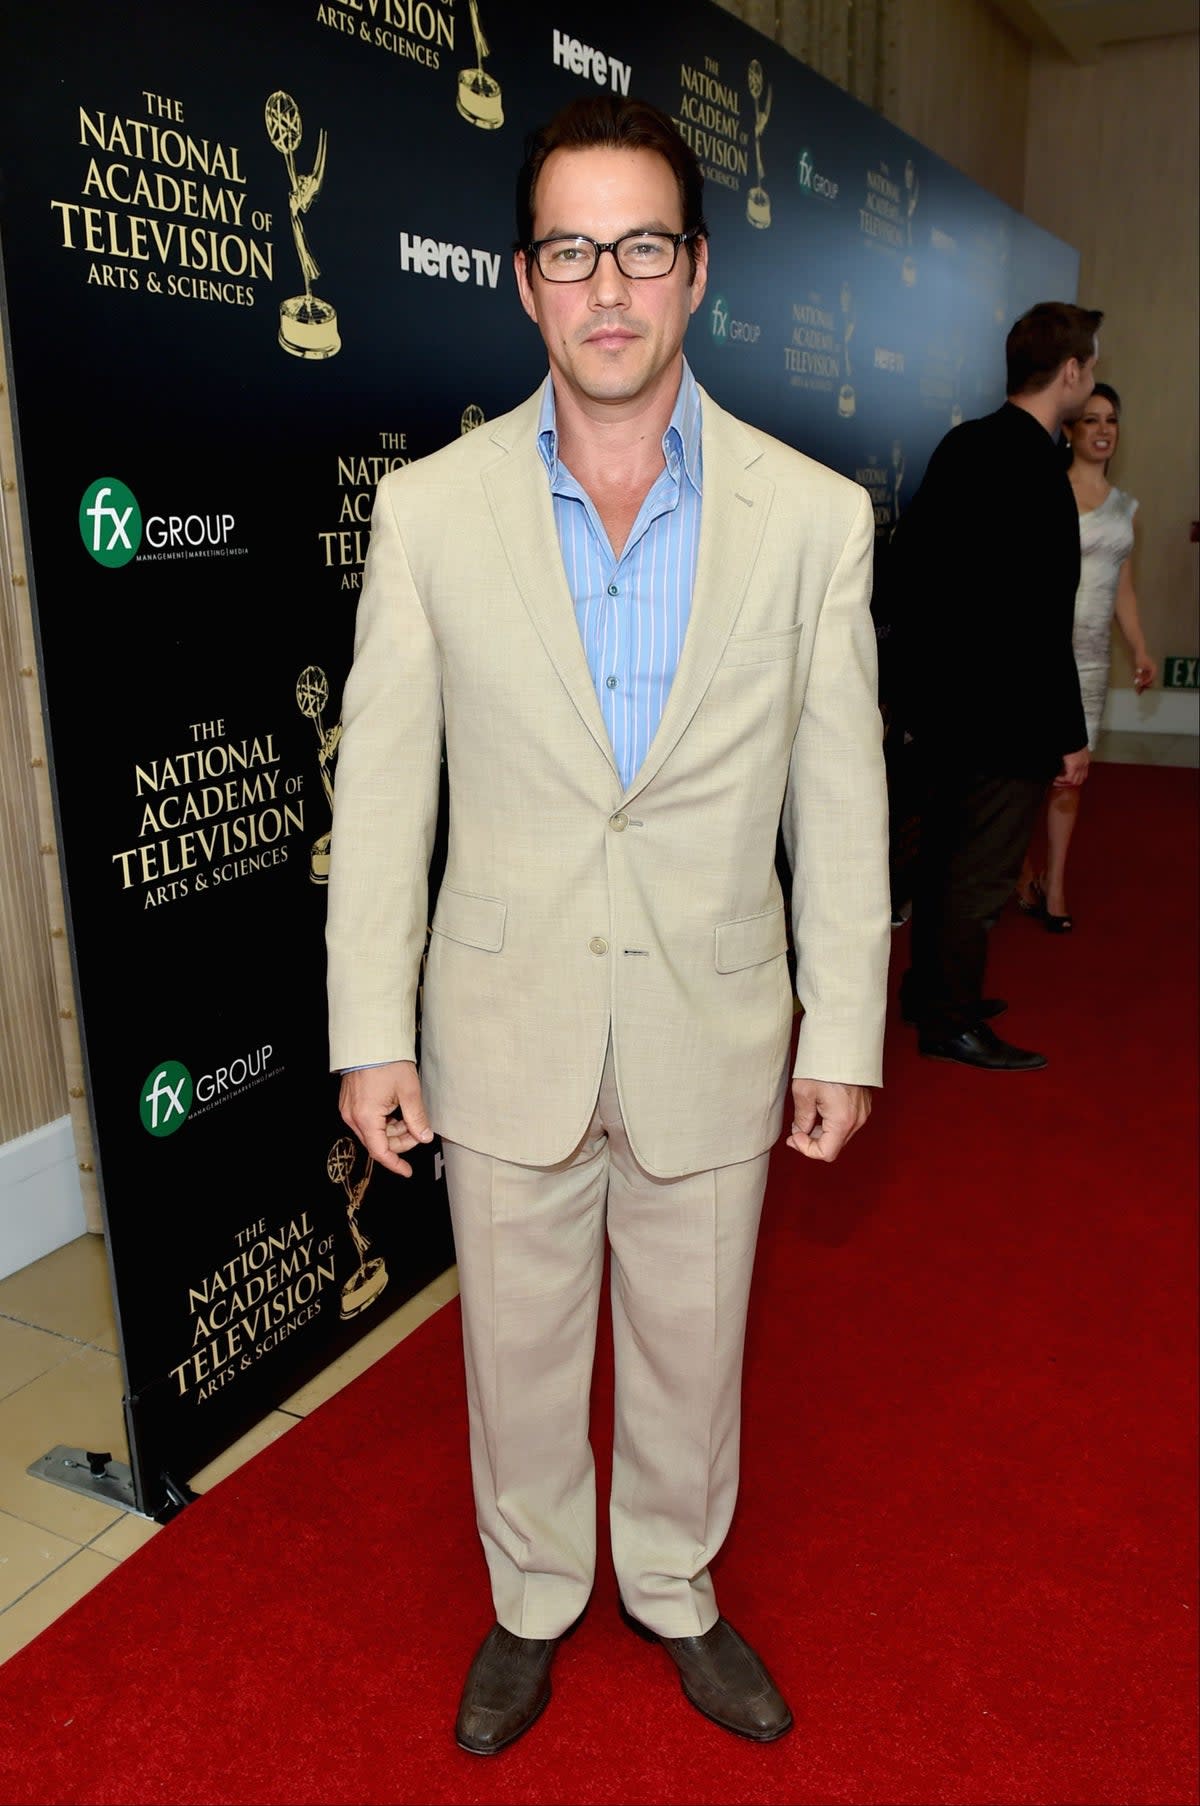 Tyler Christopher attends the 41st Annual Daytime Emmy Awards at The Beverly Hilton Hotel on June 22, 2014 in Beverly Hills